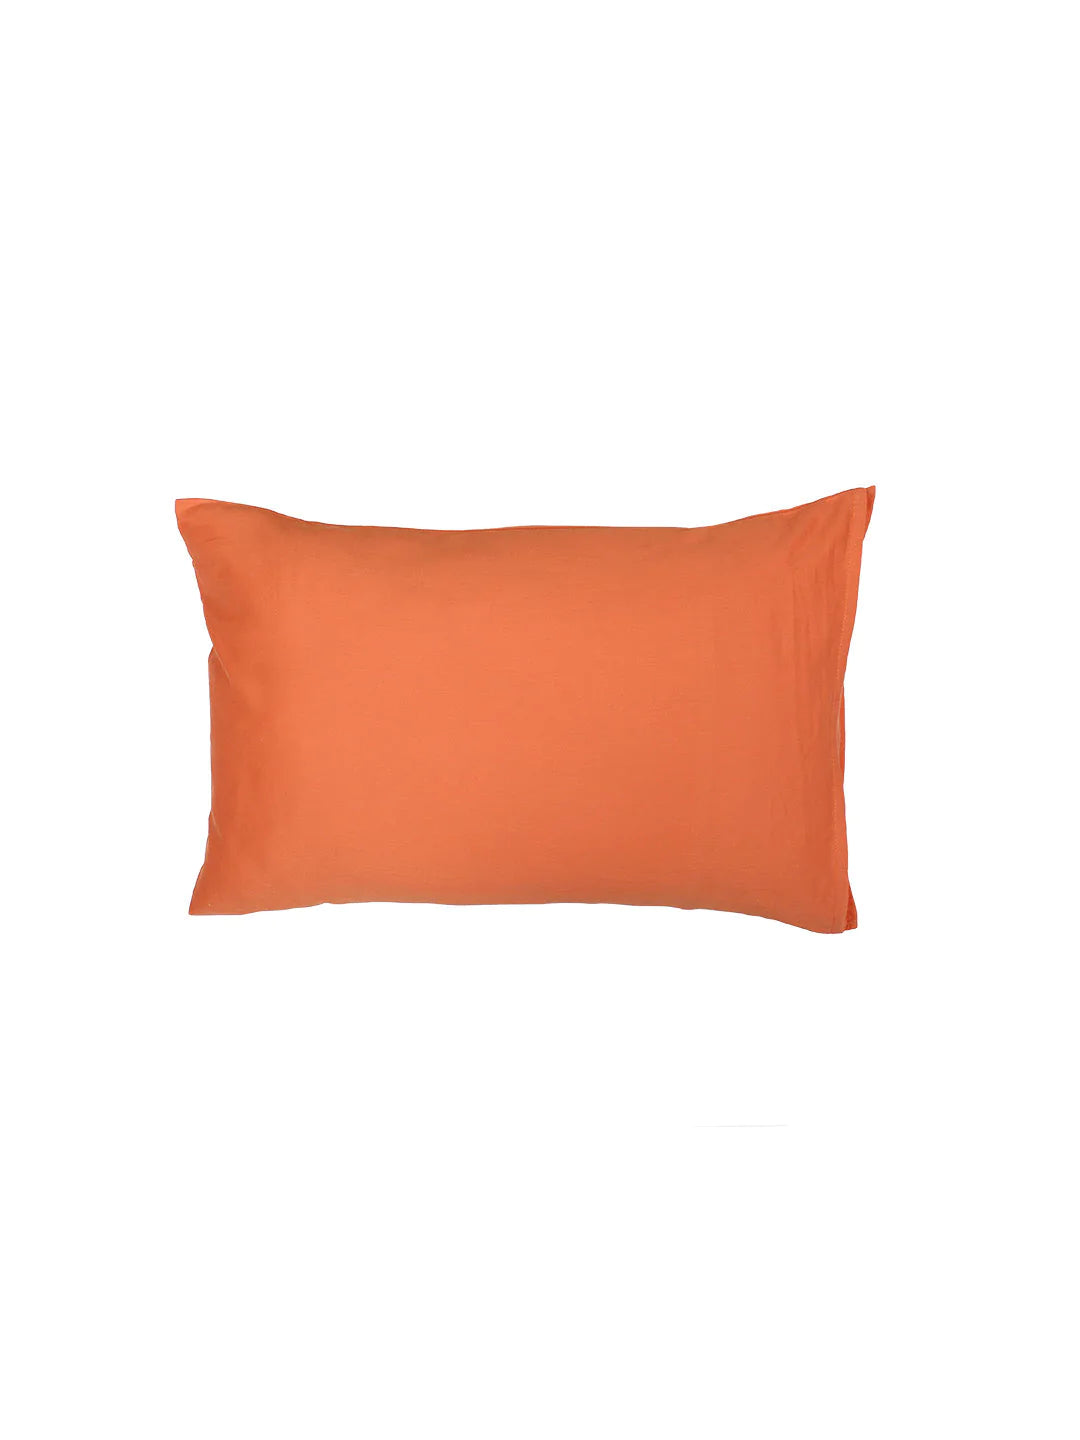 Piyambu Rust Fitted Sheet with Pillow Cover